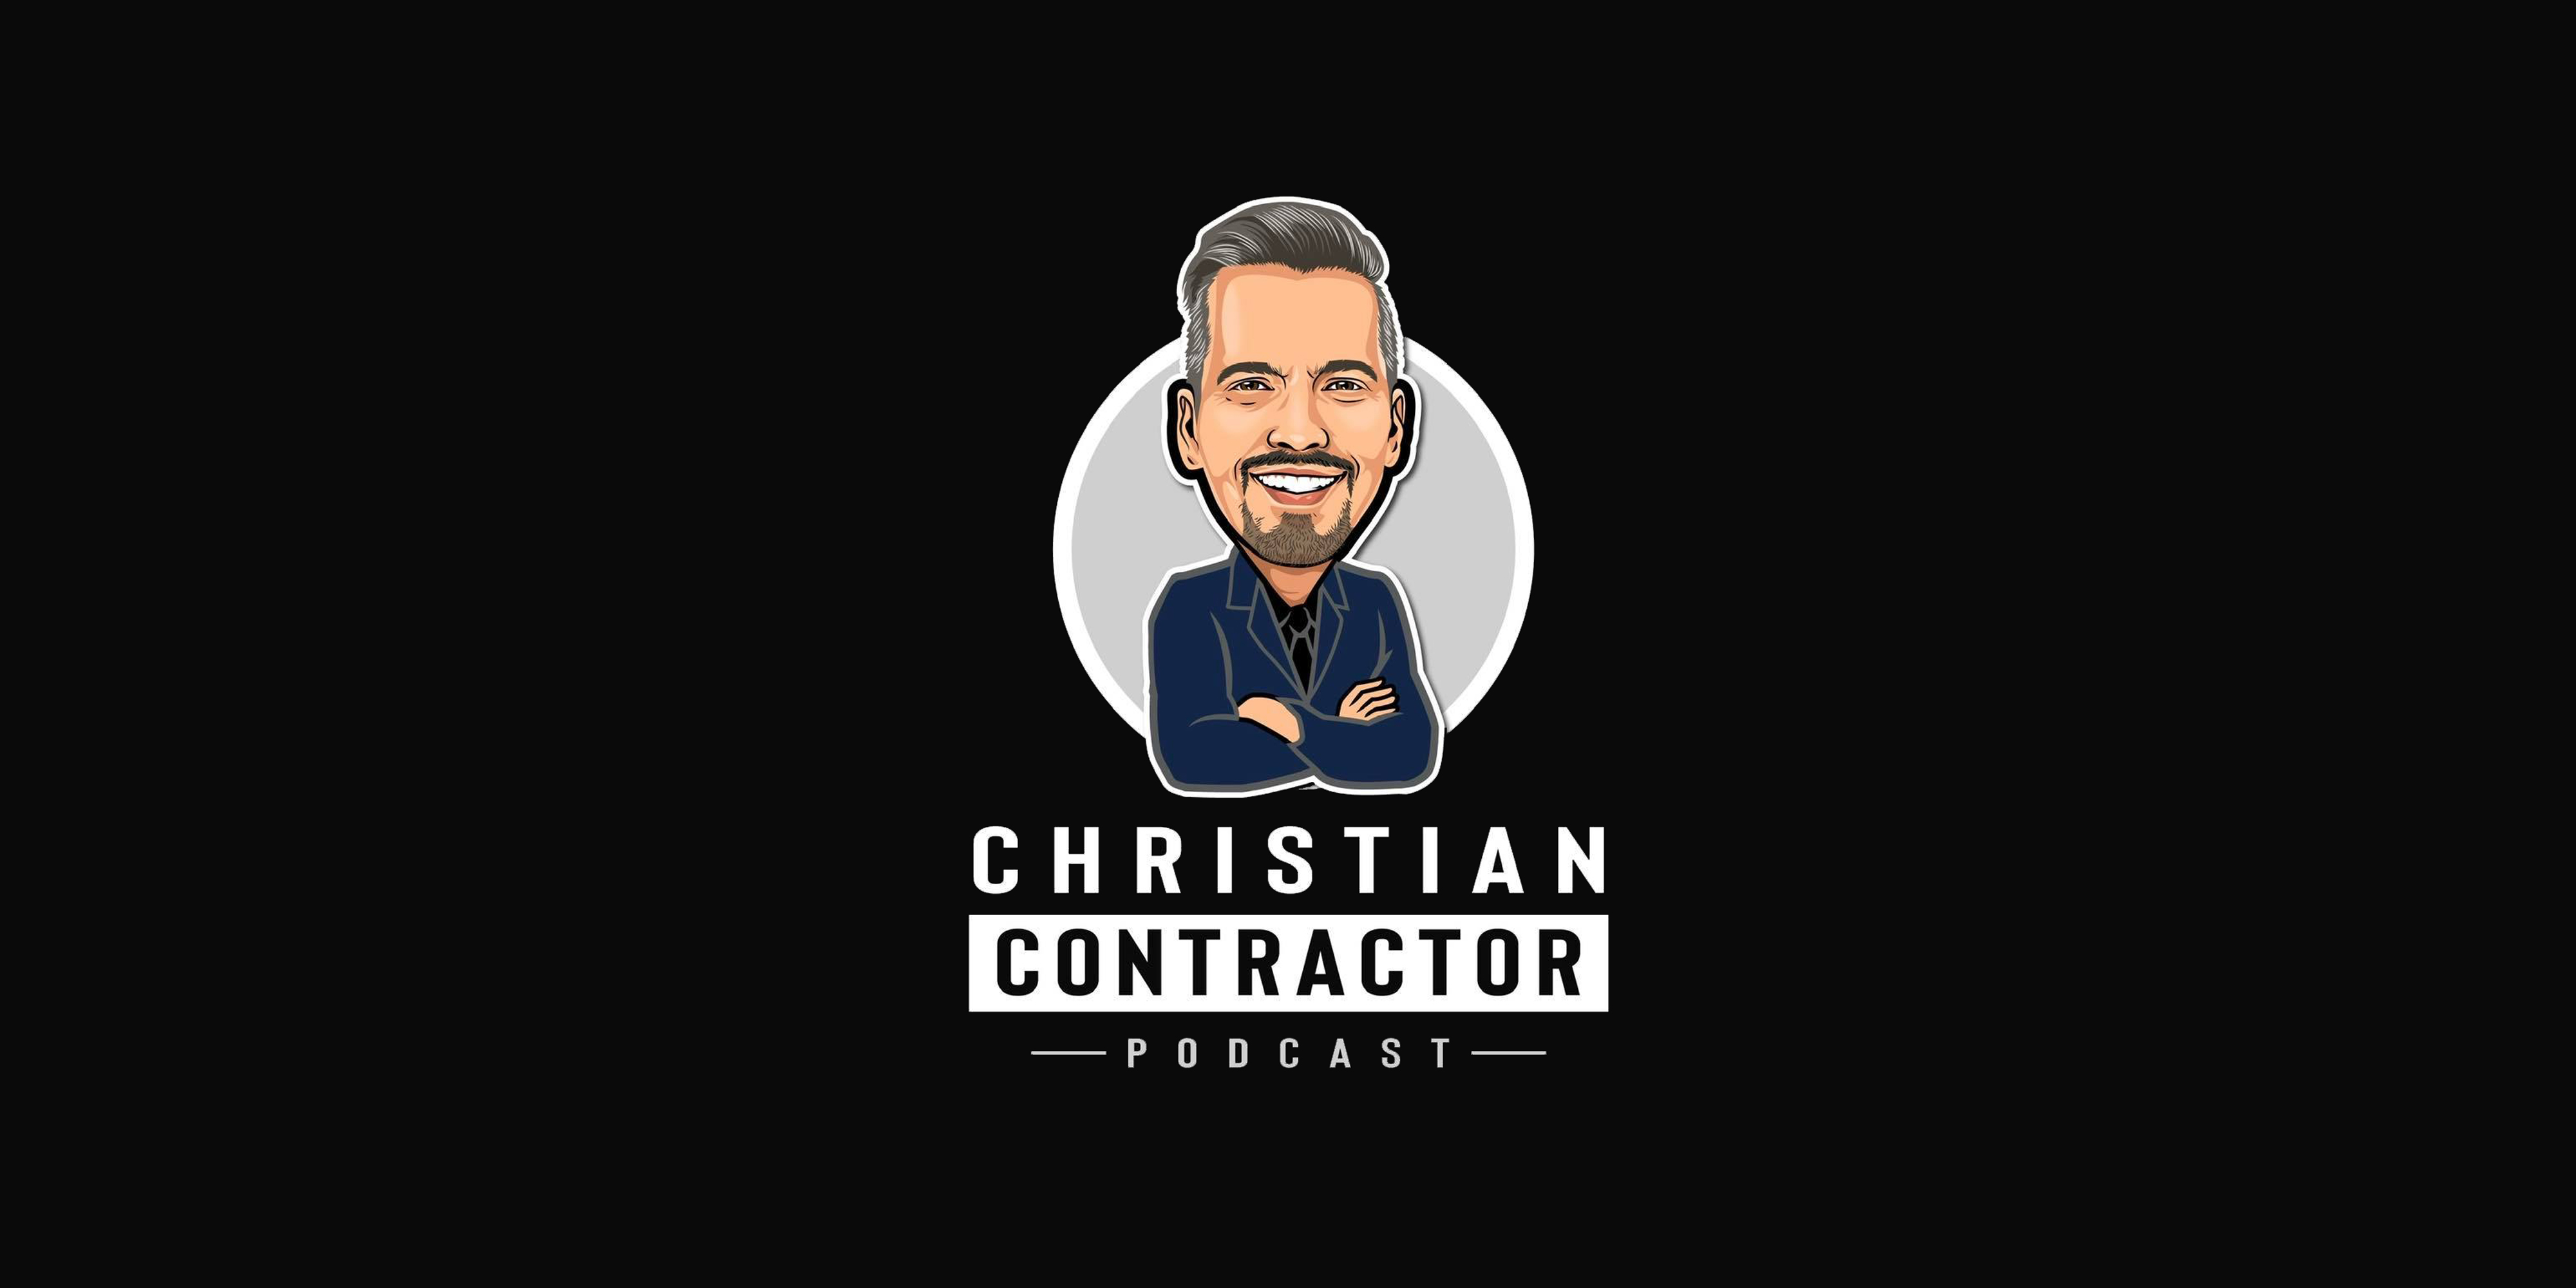 Christian Contractor